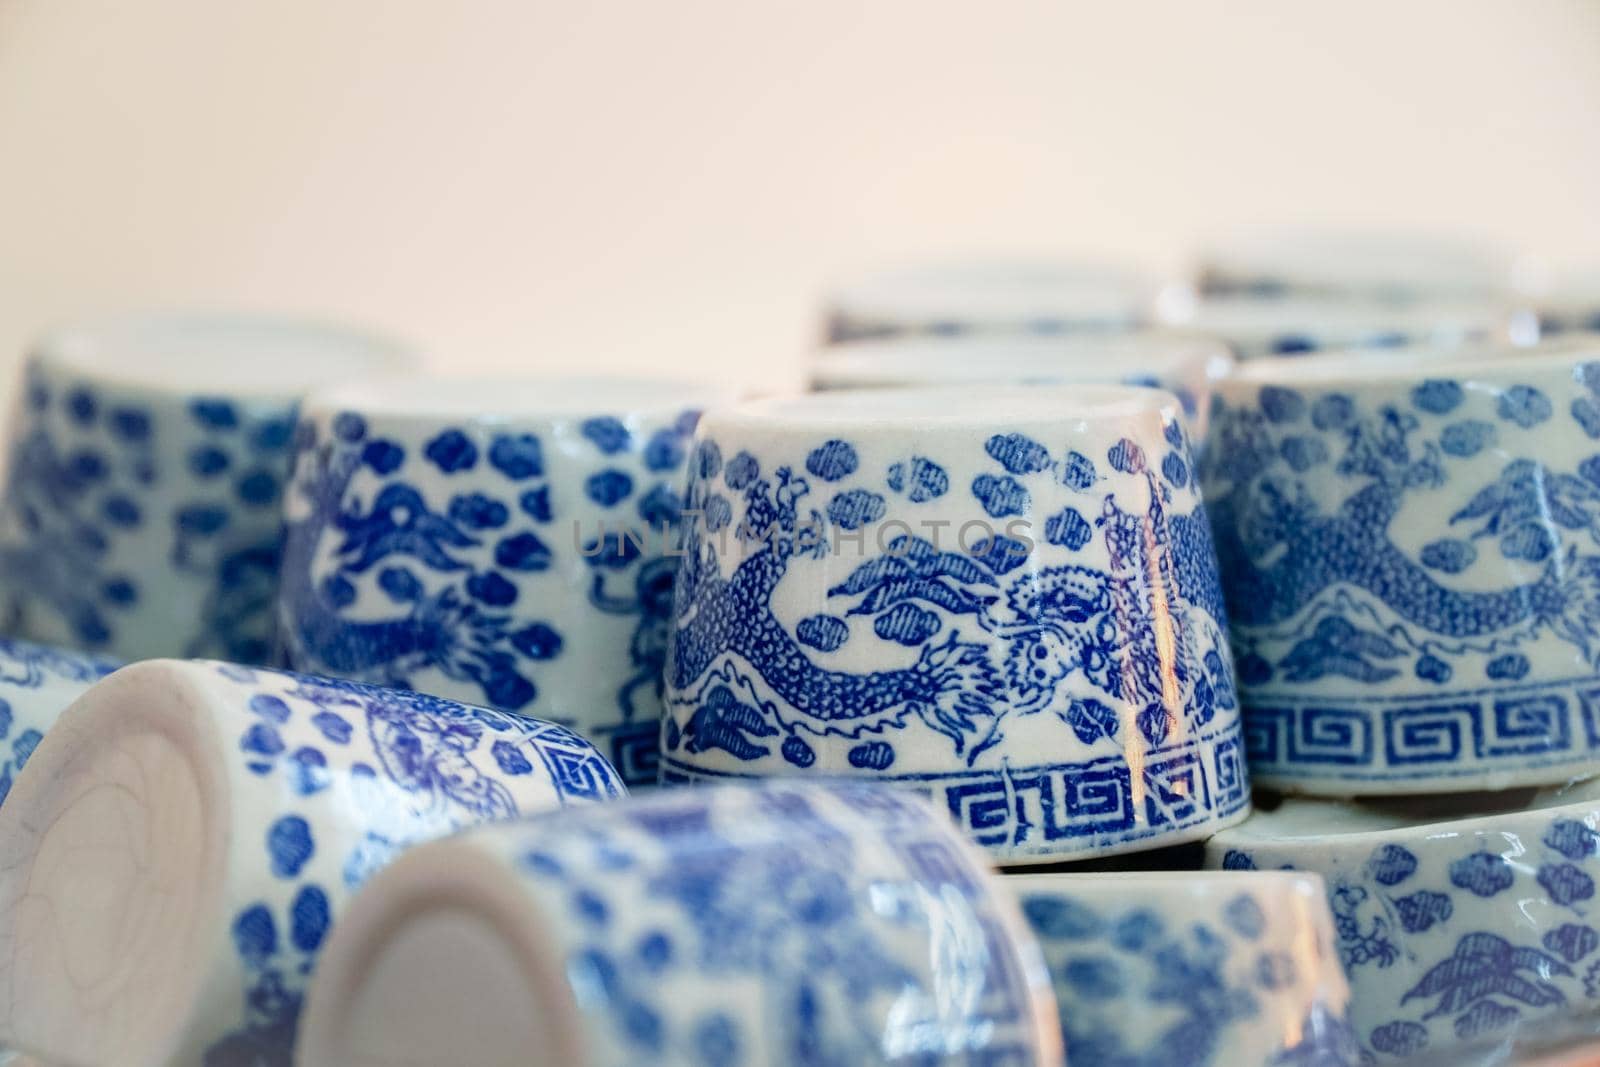 Rows of Traditional Chinese Ceramic Tea Cups by toa55